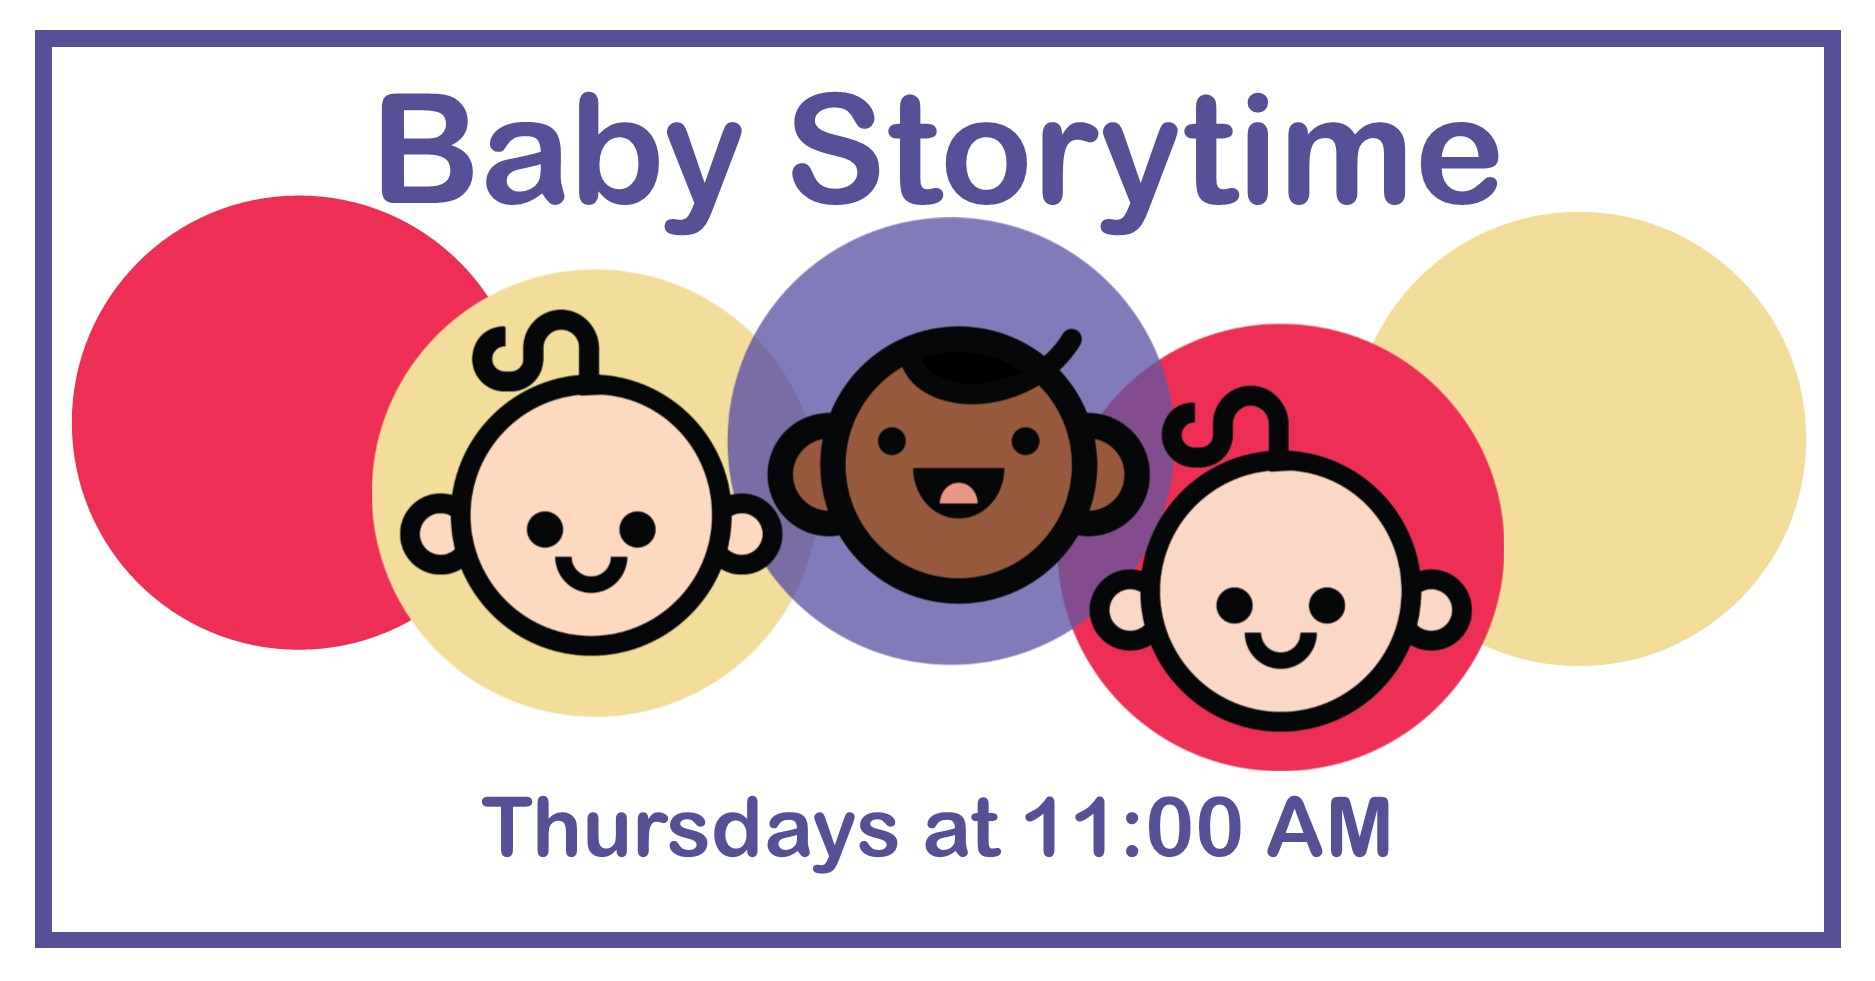 Baby Storytime, Thursdays at 11:00 AM. Image of baby's faces.